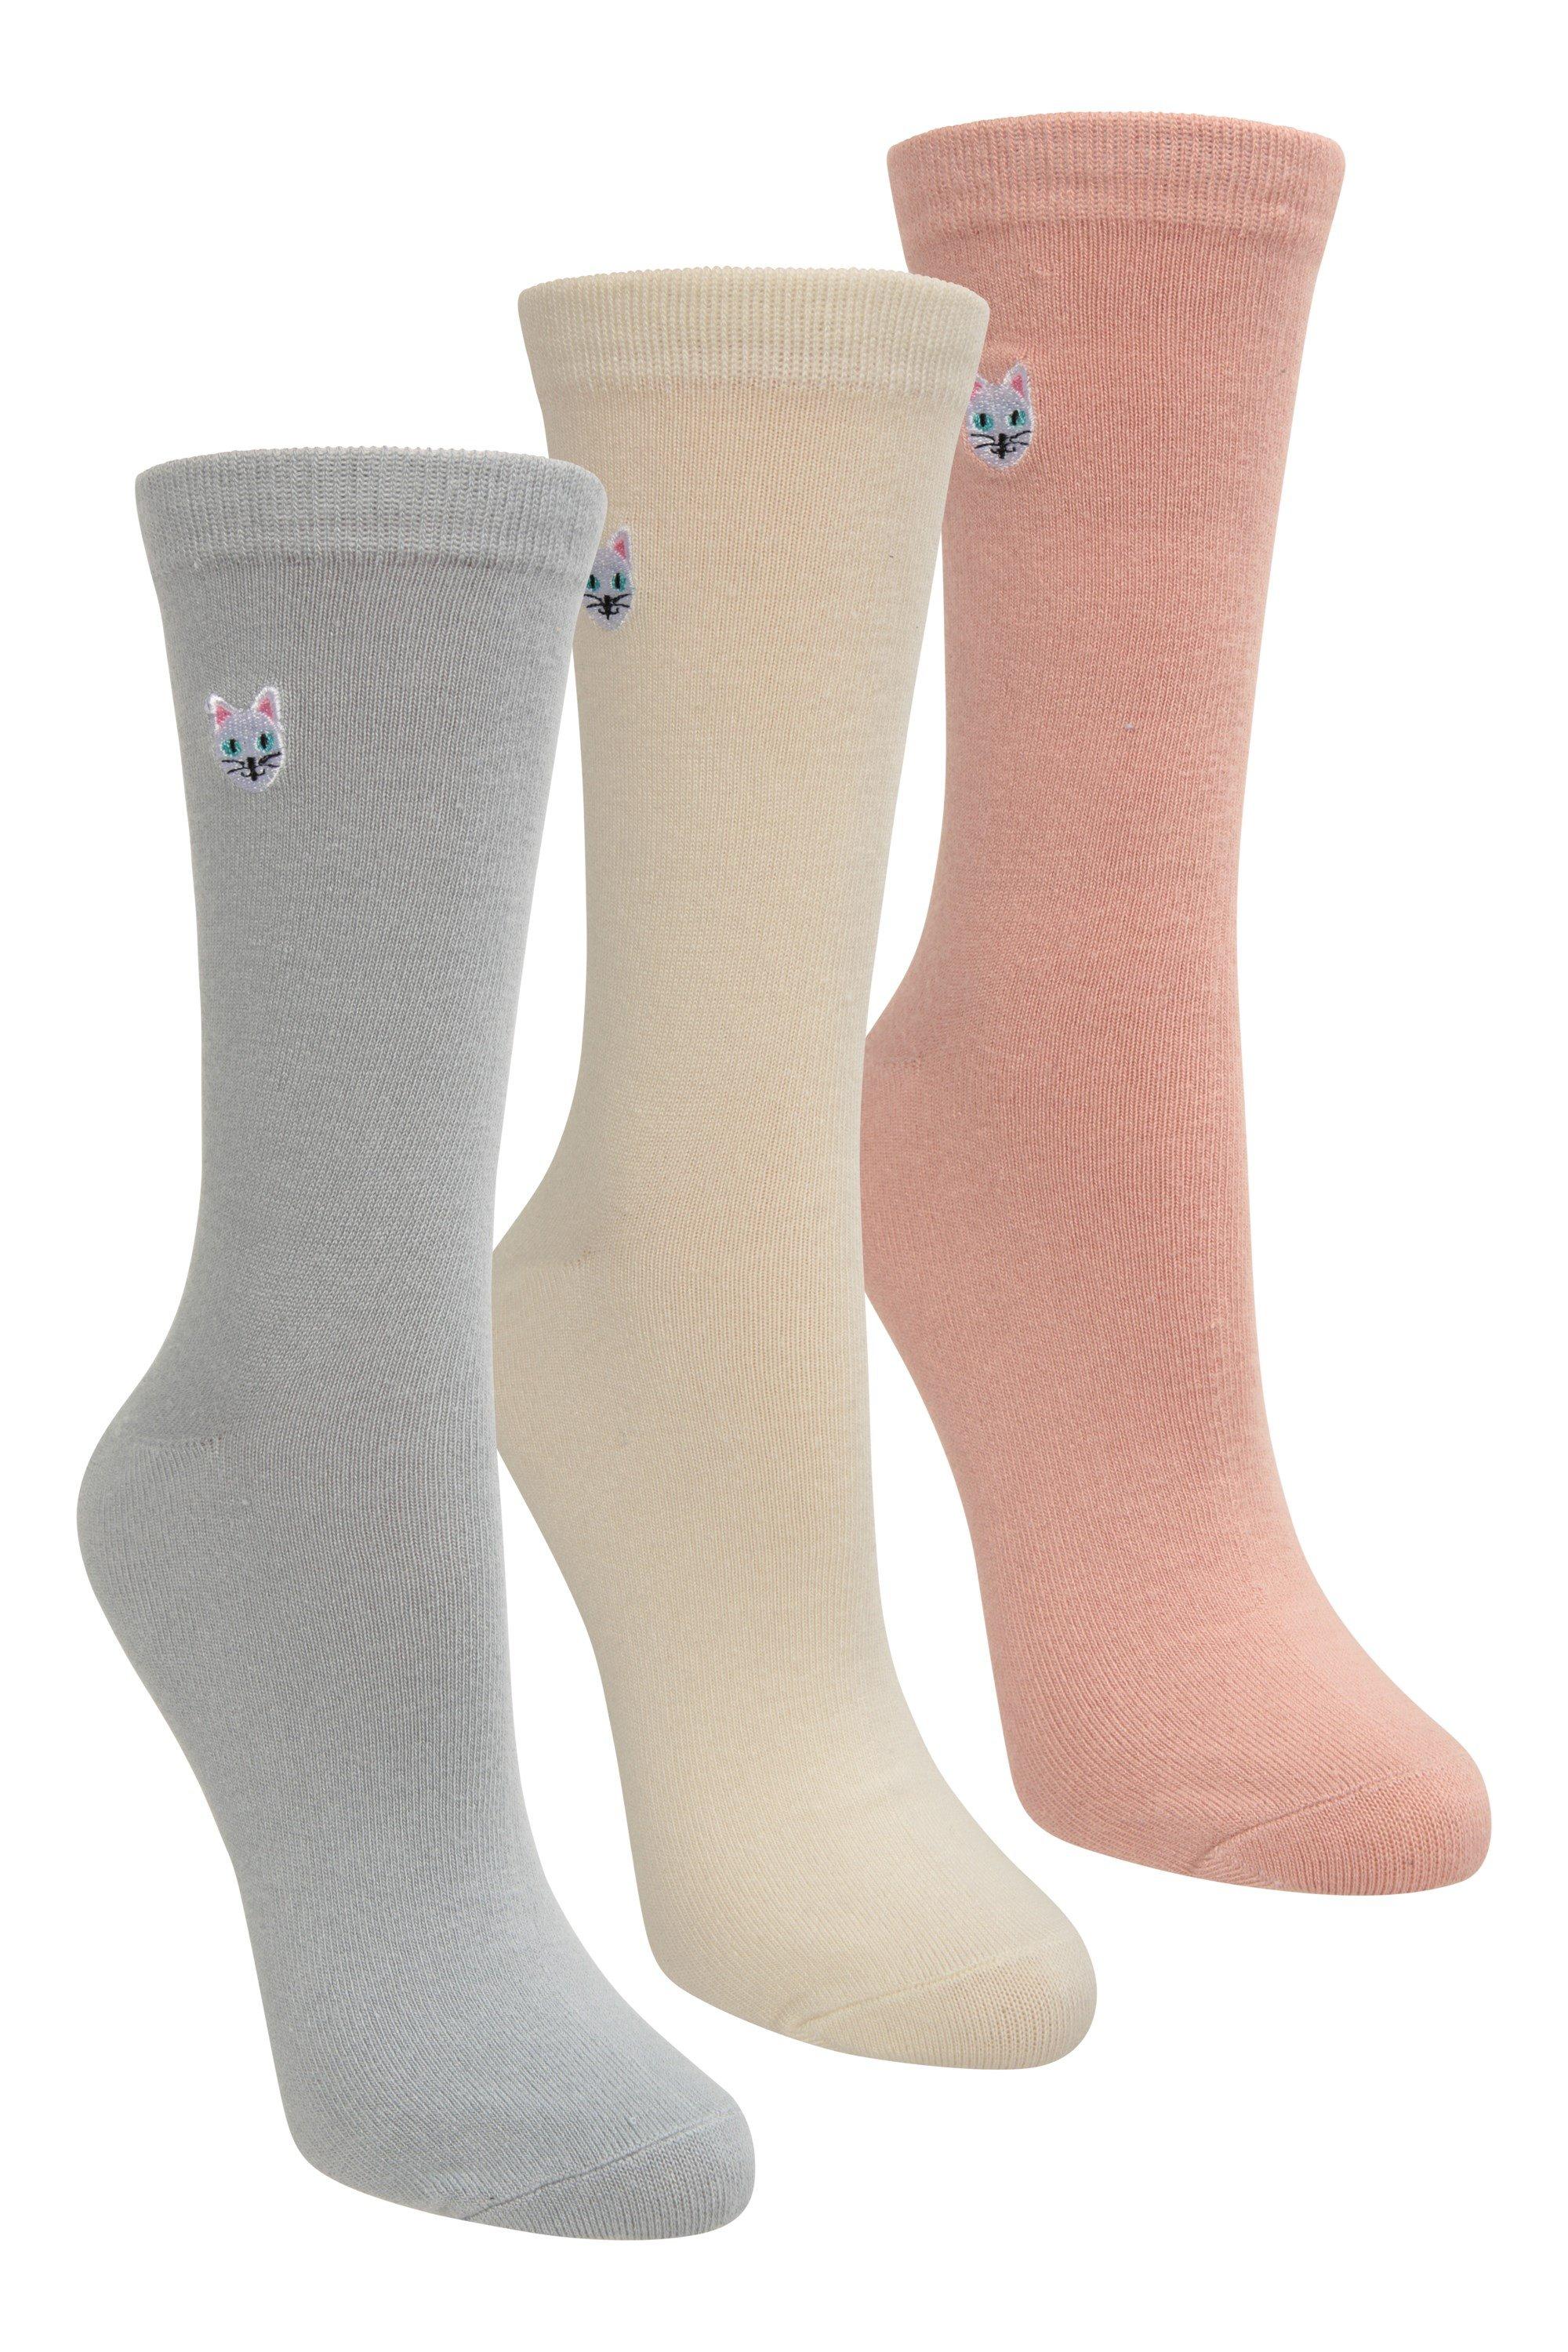 Cat Embroidered Socks  Bamboo Sock Pack of 3